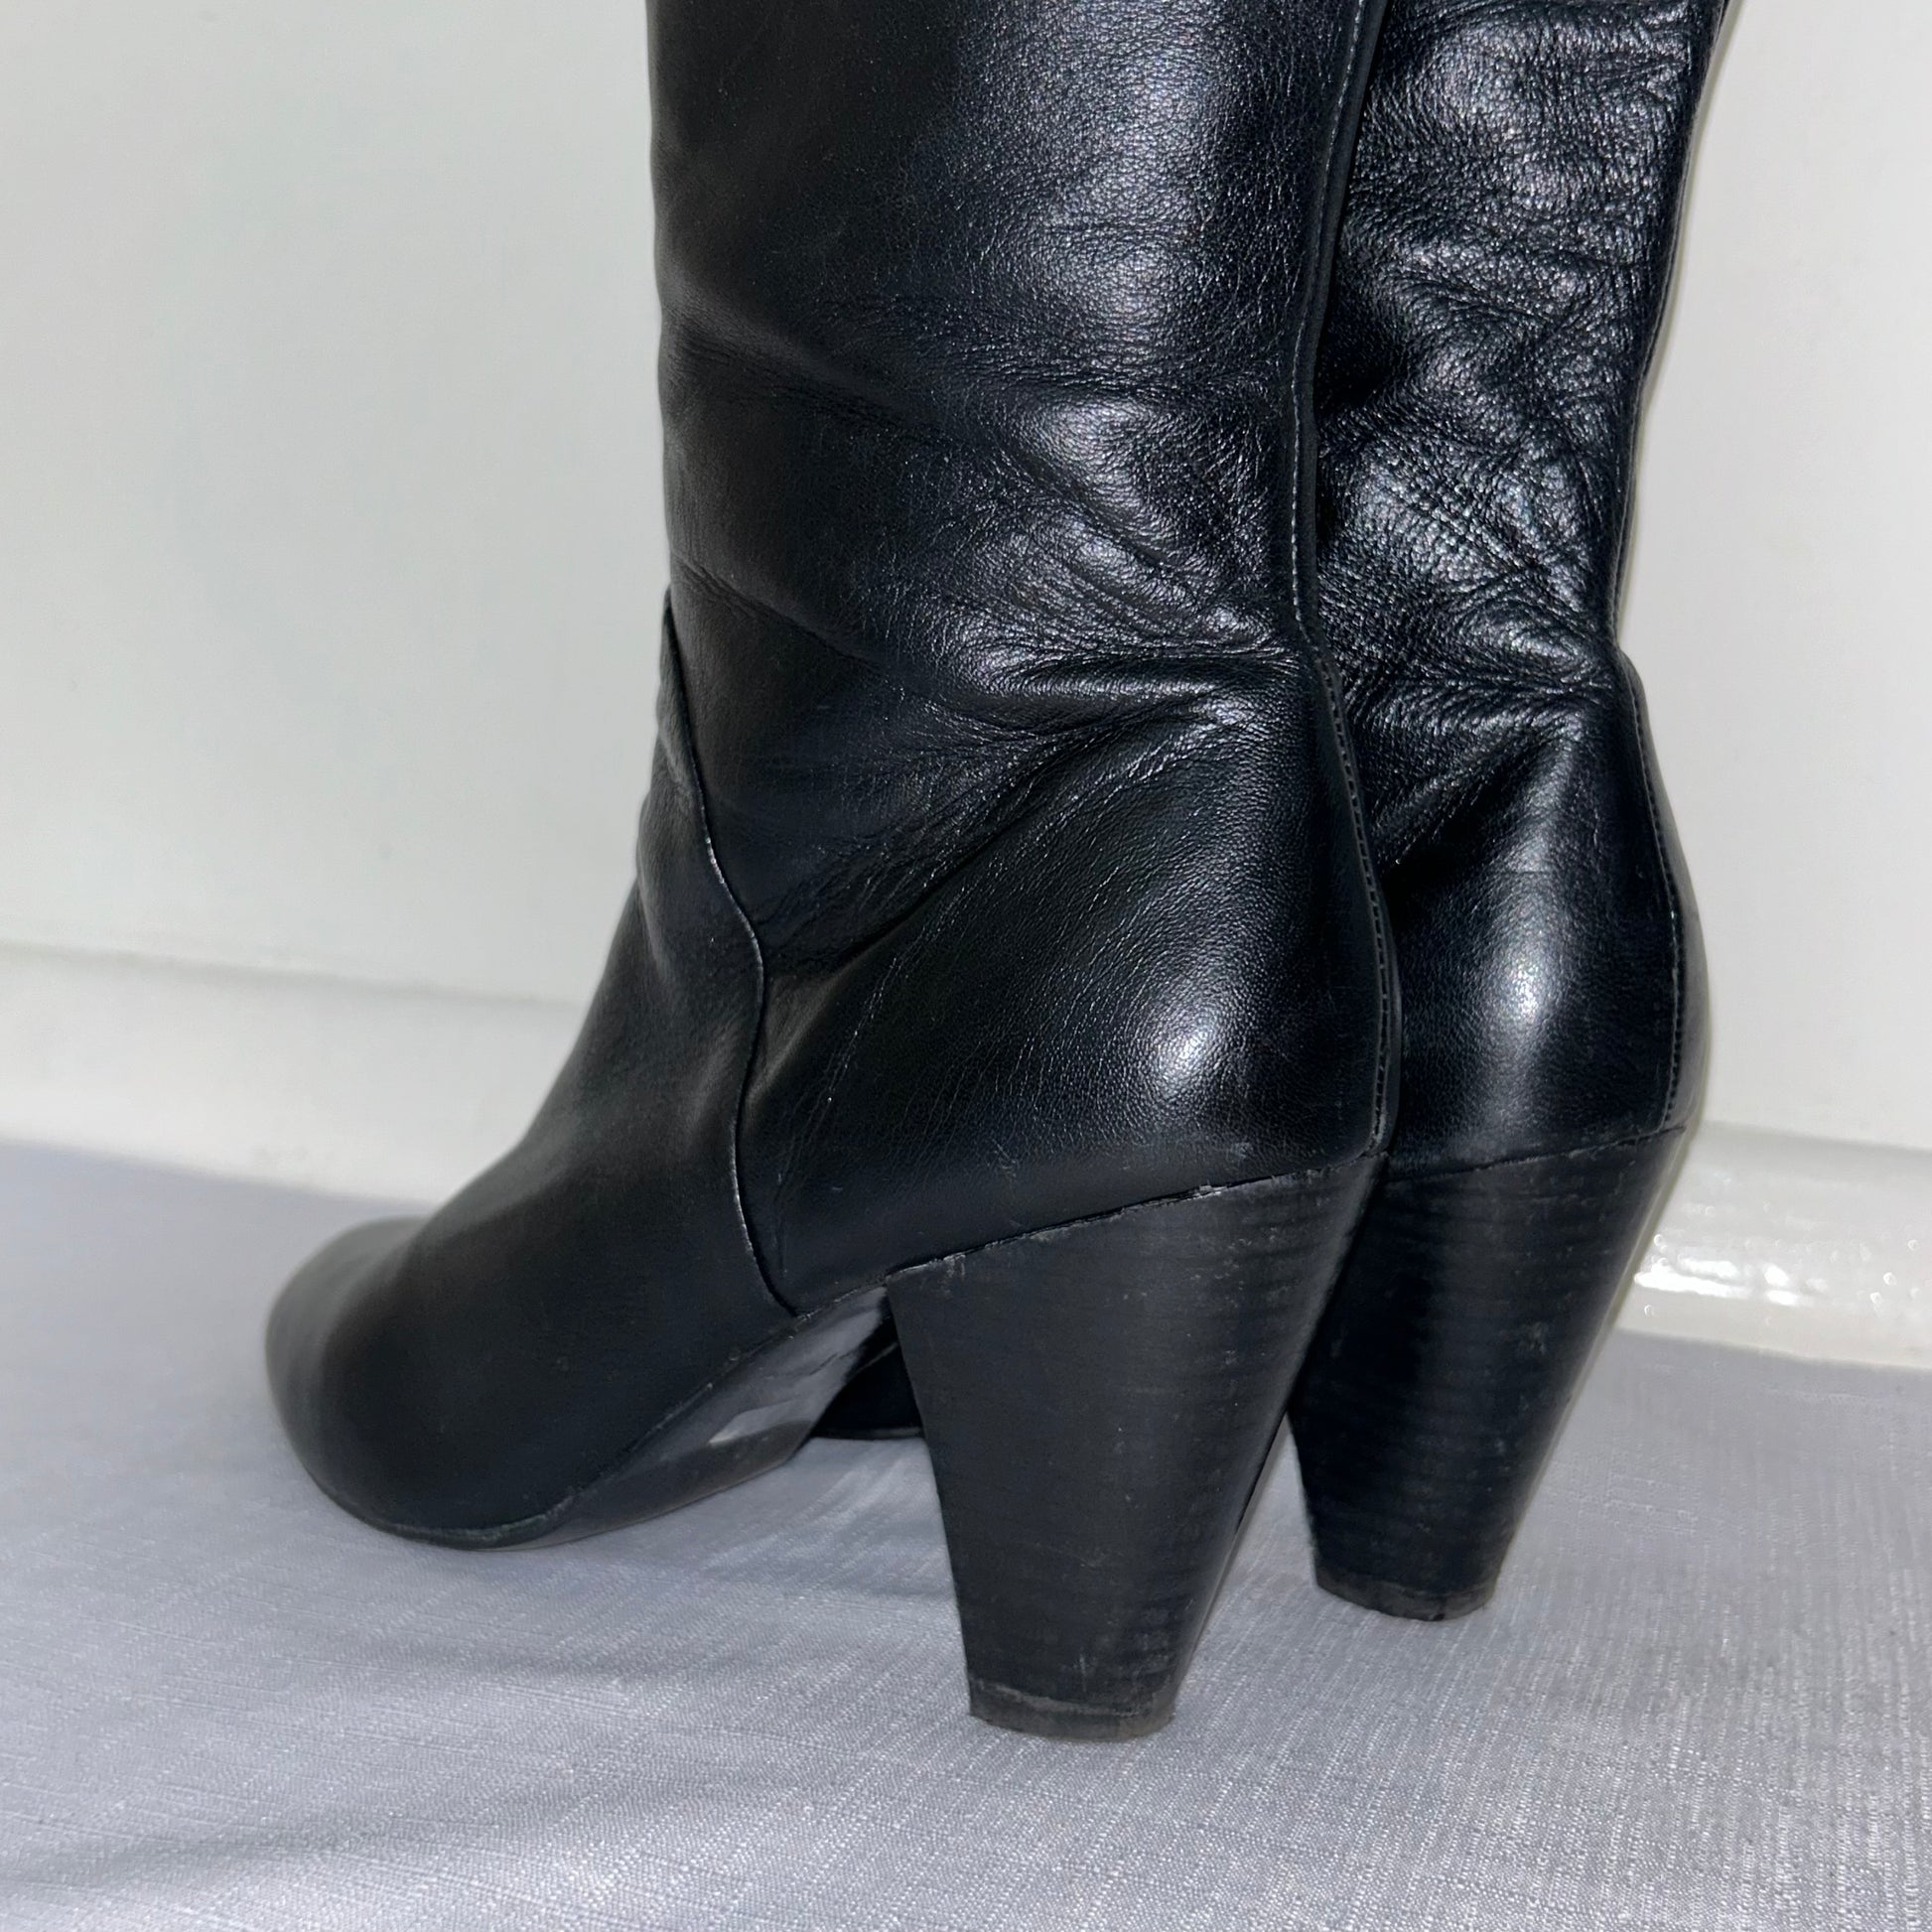 heels of black knee high boots shown on a white background